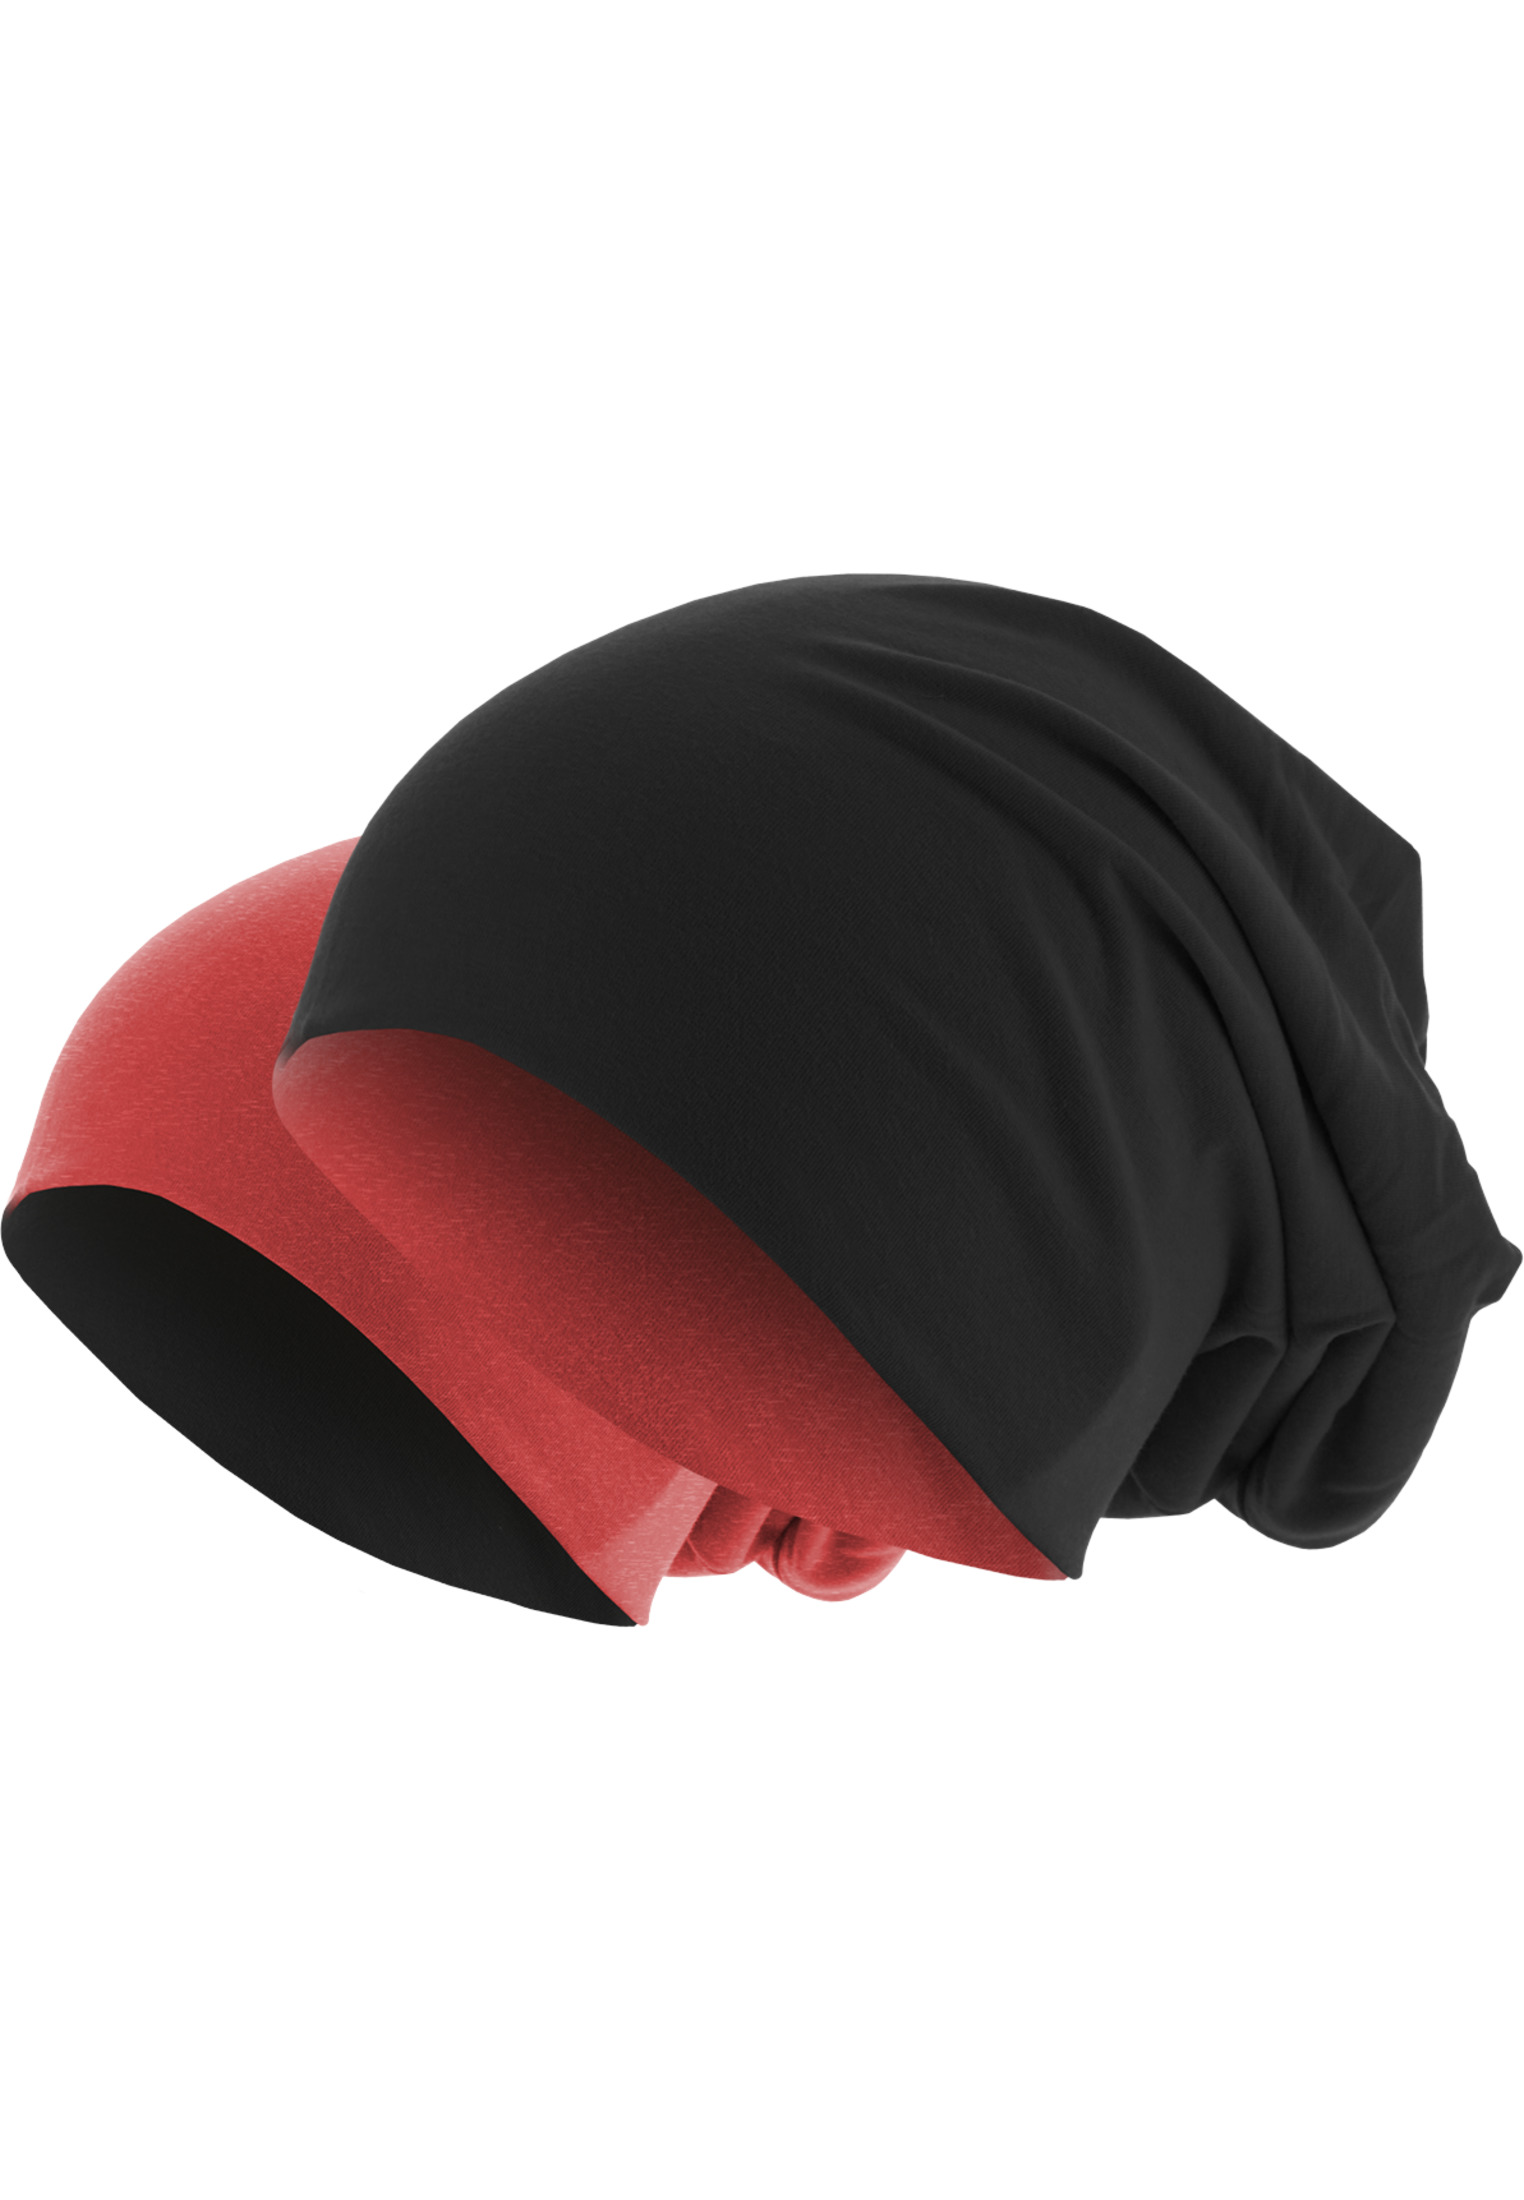 Caps & Beanies Jersey Beanie reversible in Farbe blk/red